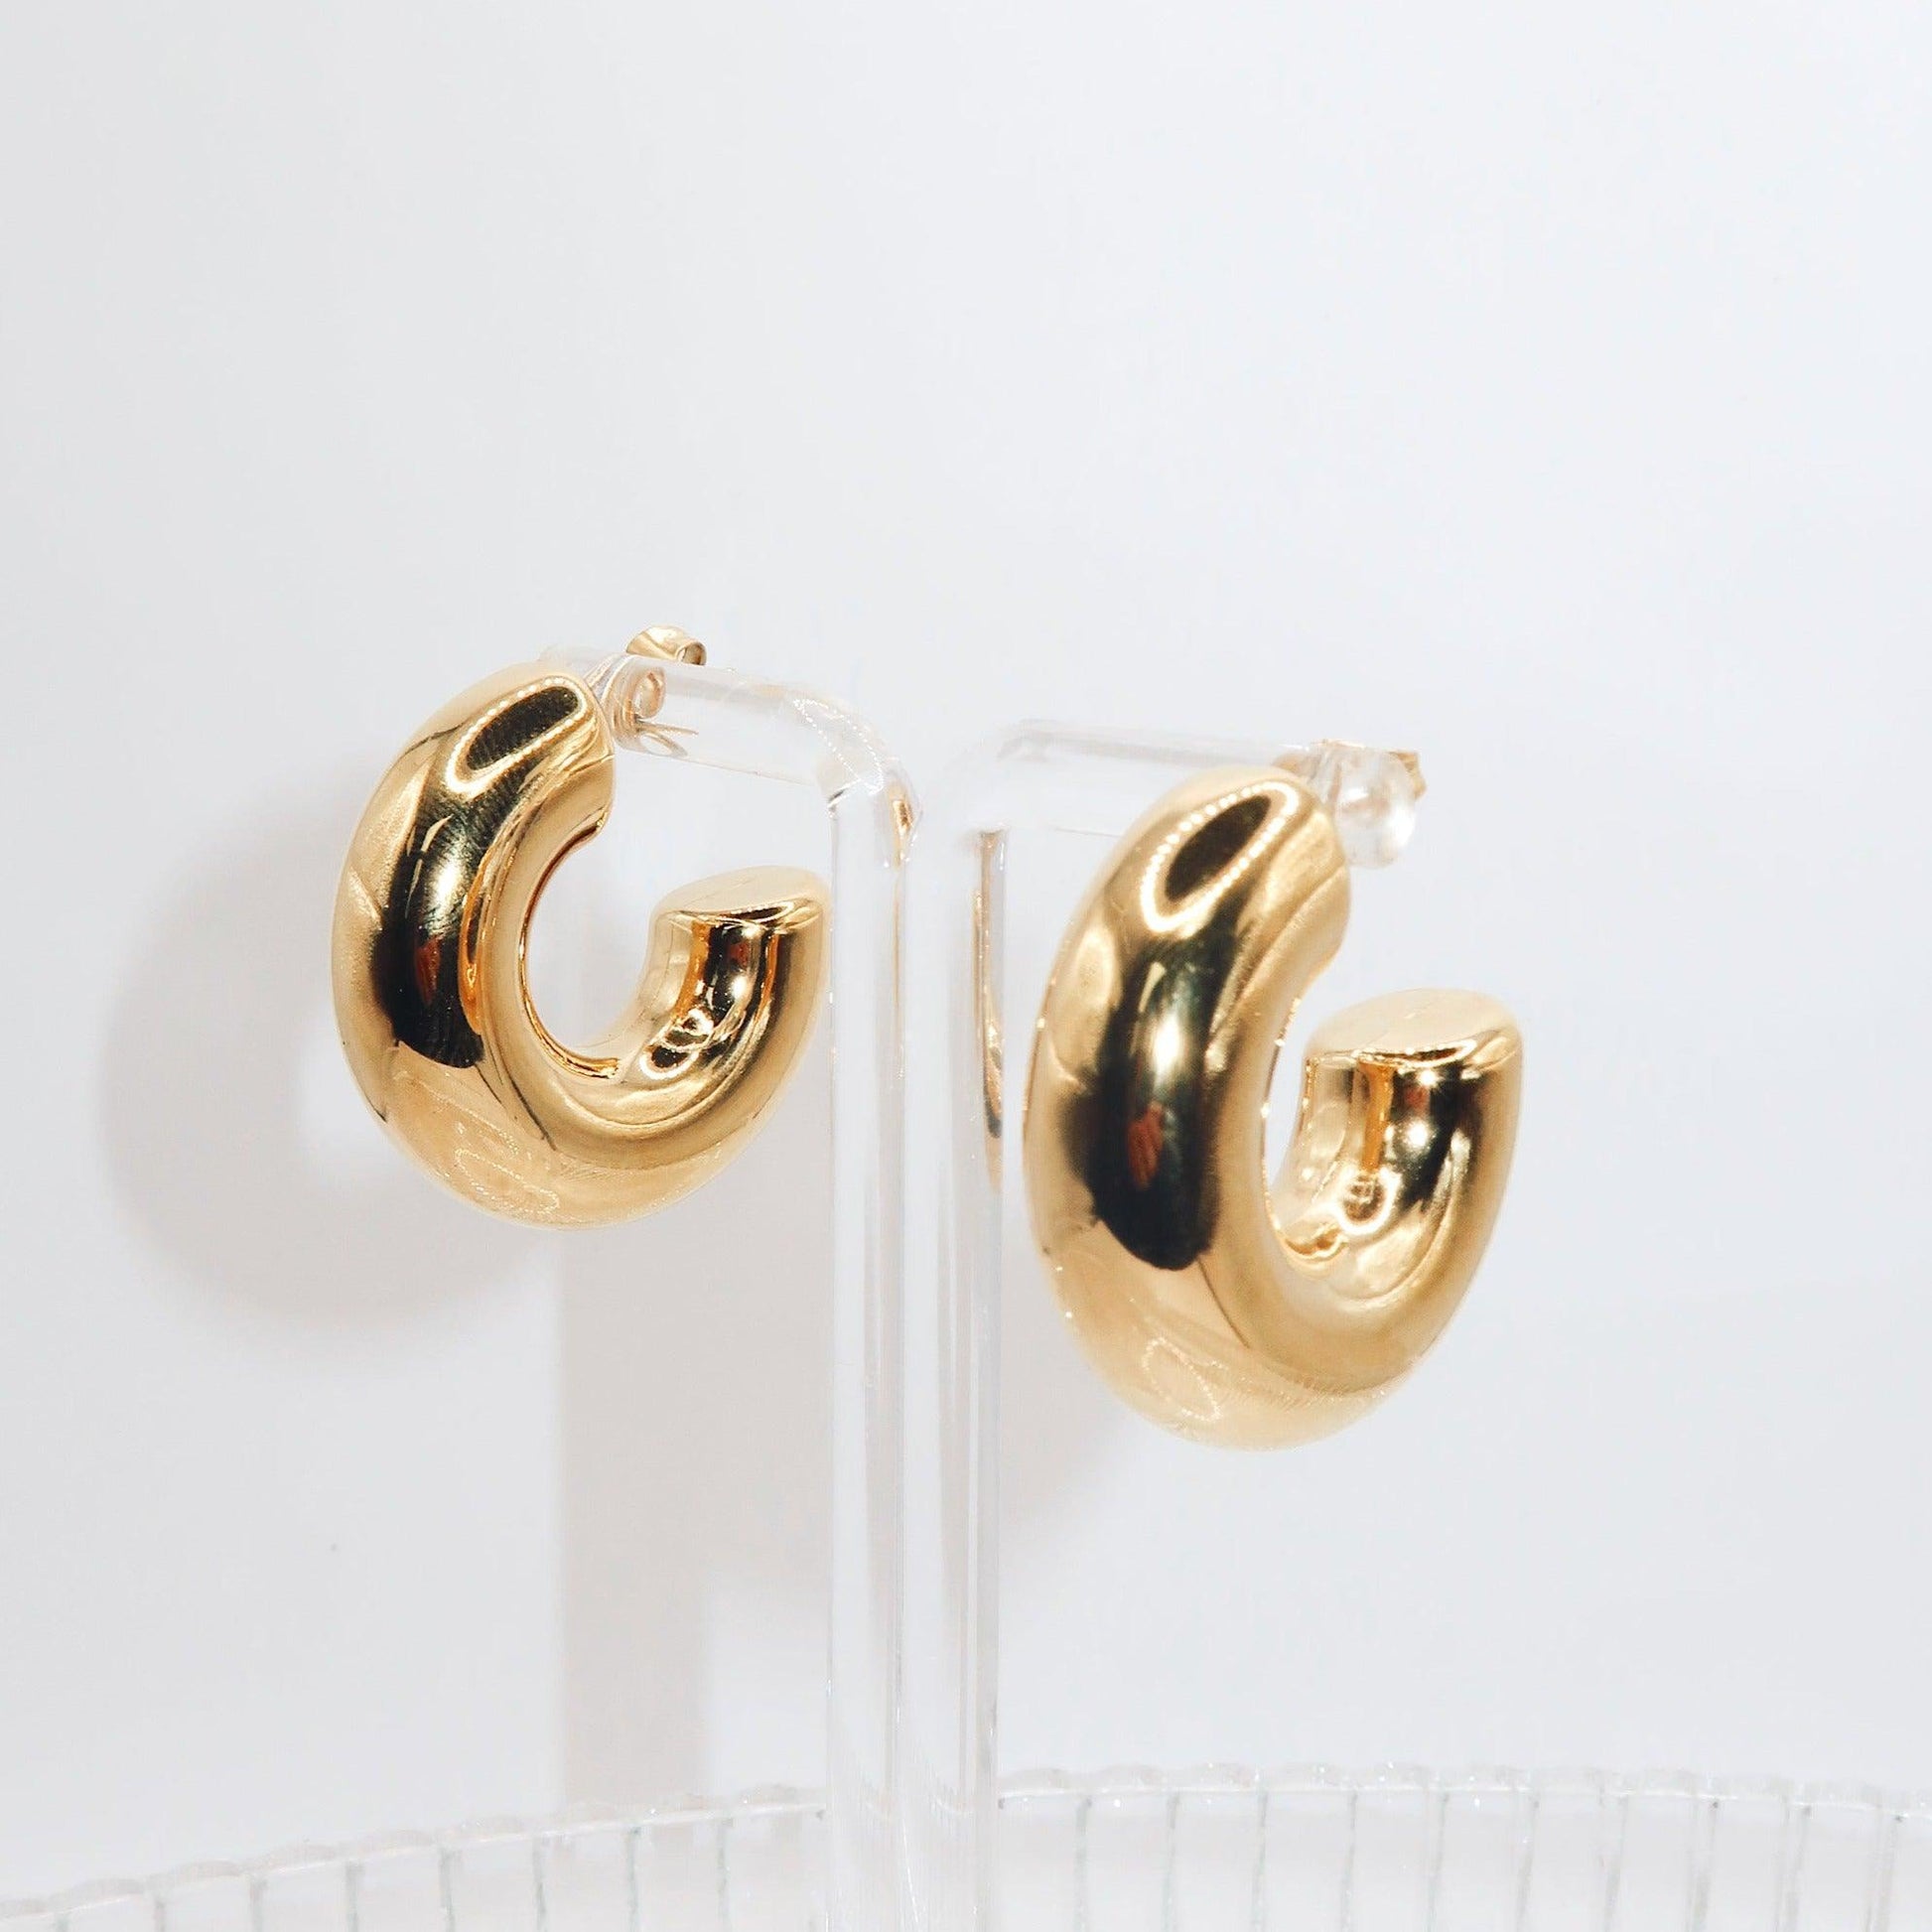 SERENITY - 18K PVD Gold Plated Chunky Hoop Earrings - Mixed Metals